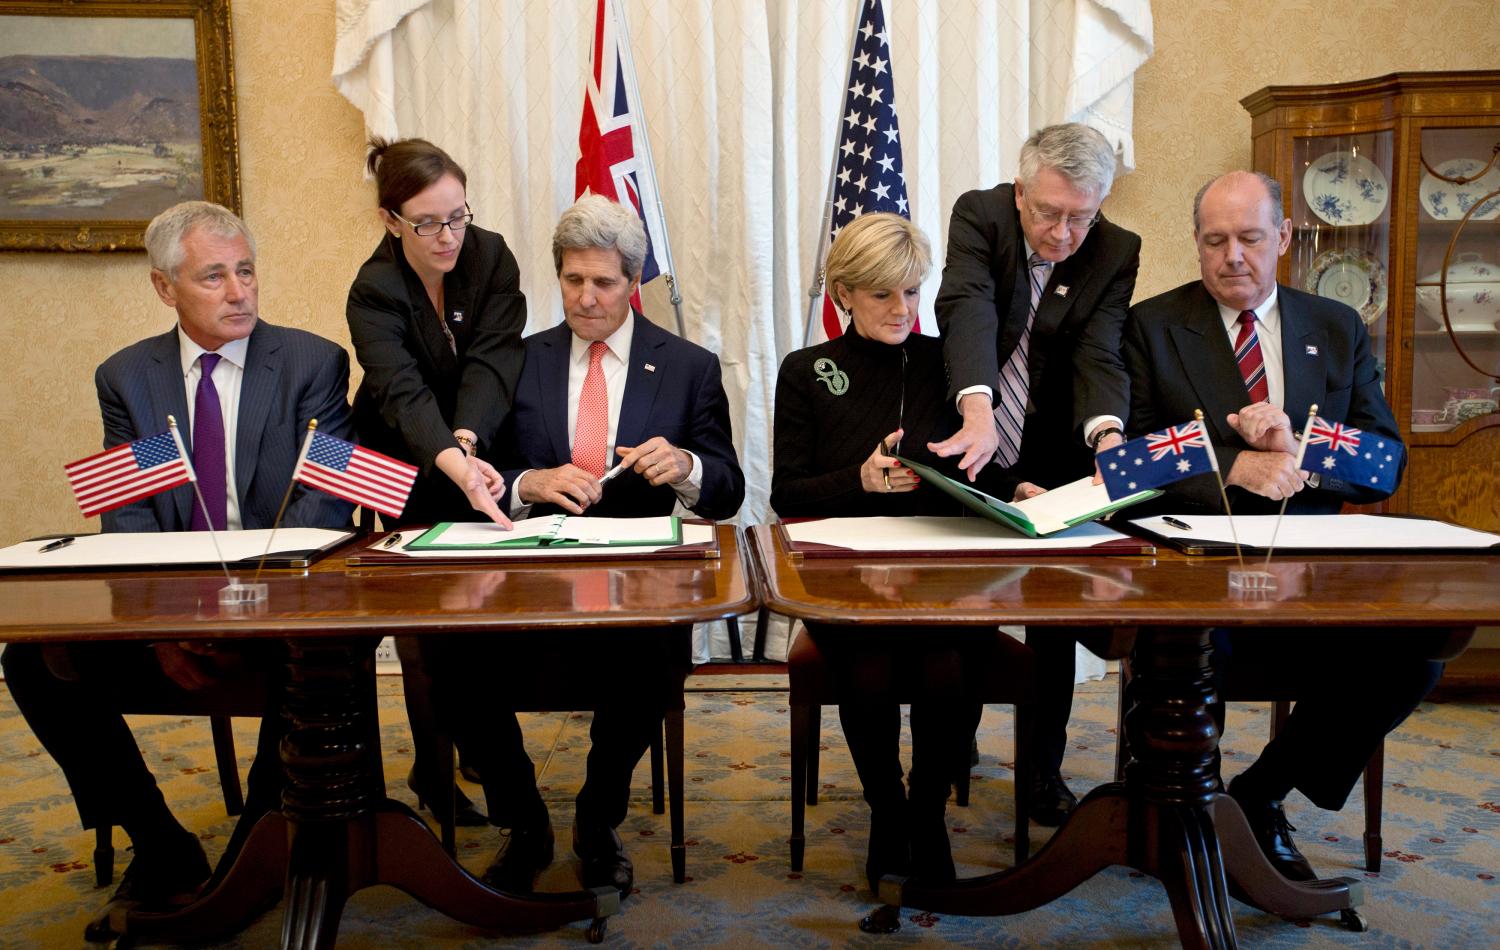 Australian Foreign Minister Julie Bishop (3rd R) and U.S. Secretary of State John Kerry (3rd L) prepare to sign a joint force posture agreement between the United States and Australia with U.S. Secretary of Defense Chuck Hagel (L) and Australian Defence Minister David Johnston at the AUSMIN meeting at Admiralty House in Sydney, August 12, 2014. REUTERS/Jason Reed (AUSTRALIA - Tags: POLITICS MILITARY) - RTR42248